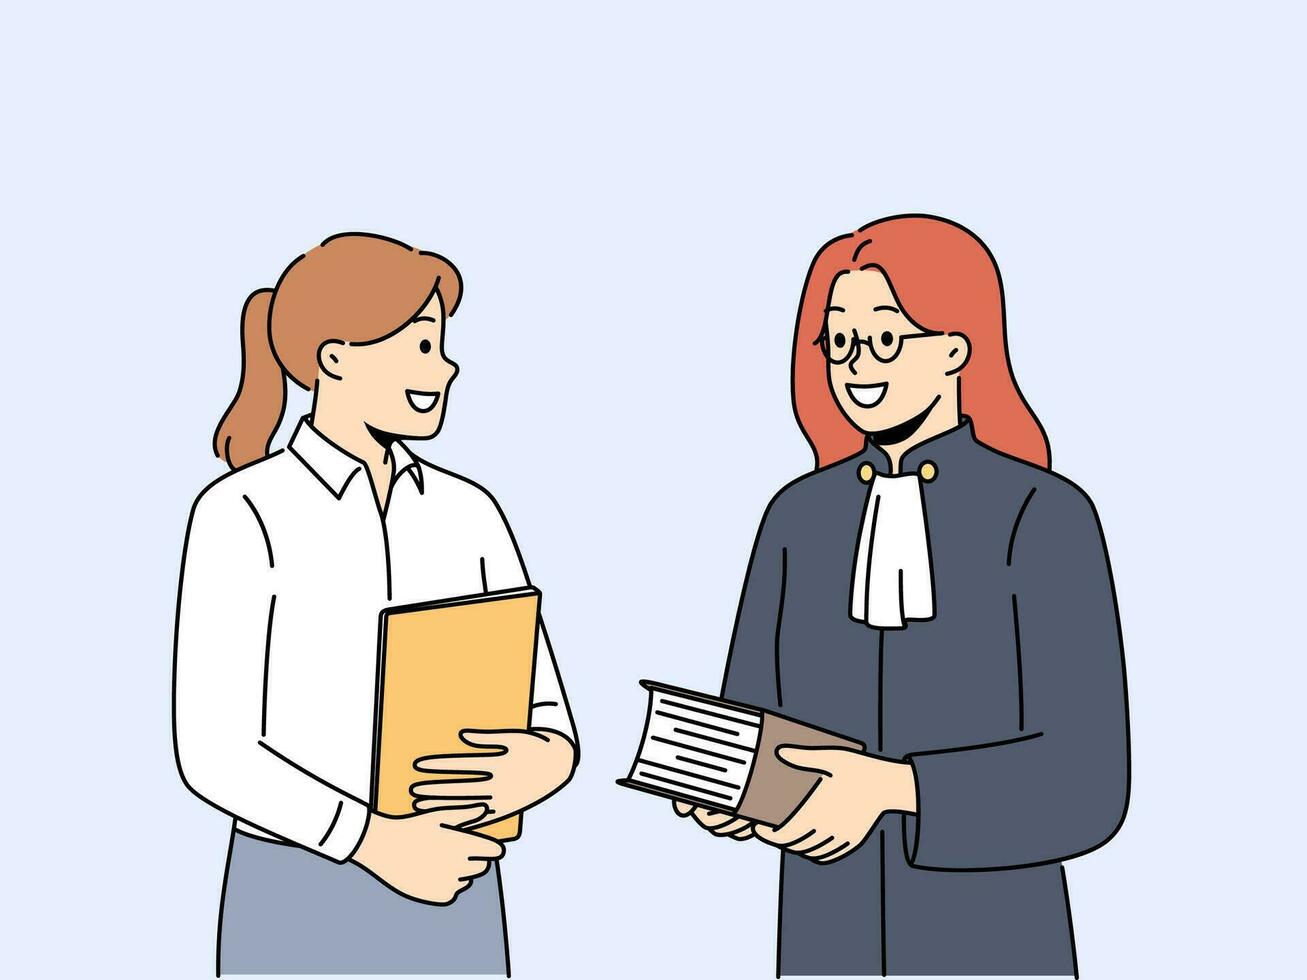 Smiling female lawyer and paralegal with folders in office. Happy woman judge with assistant holding documents in court. Vector illustration.